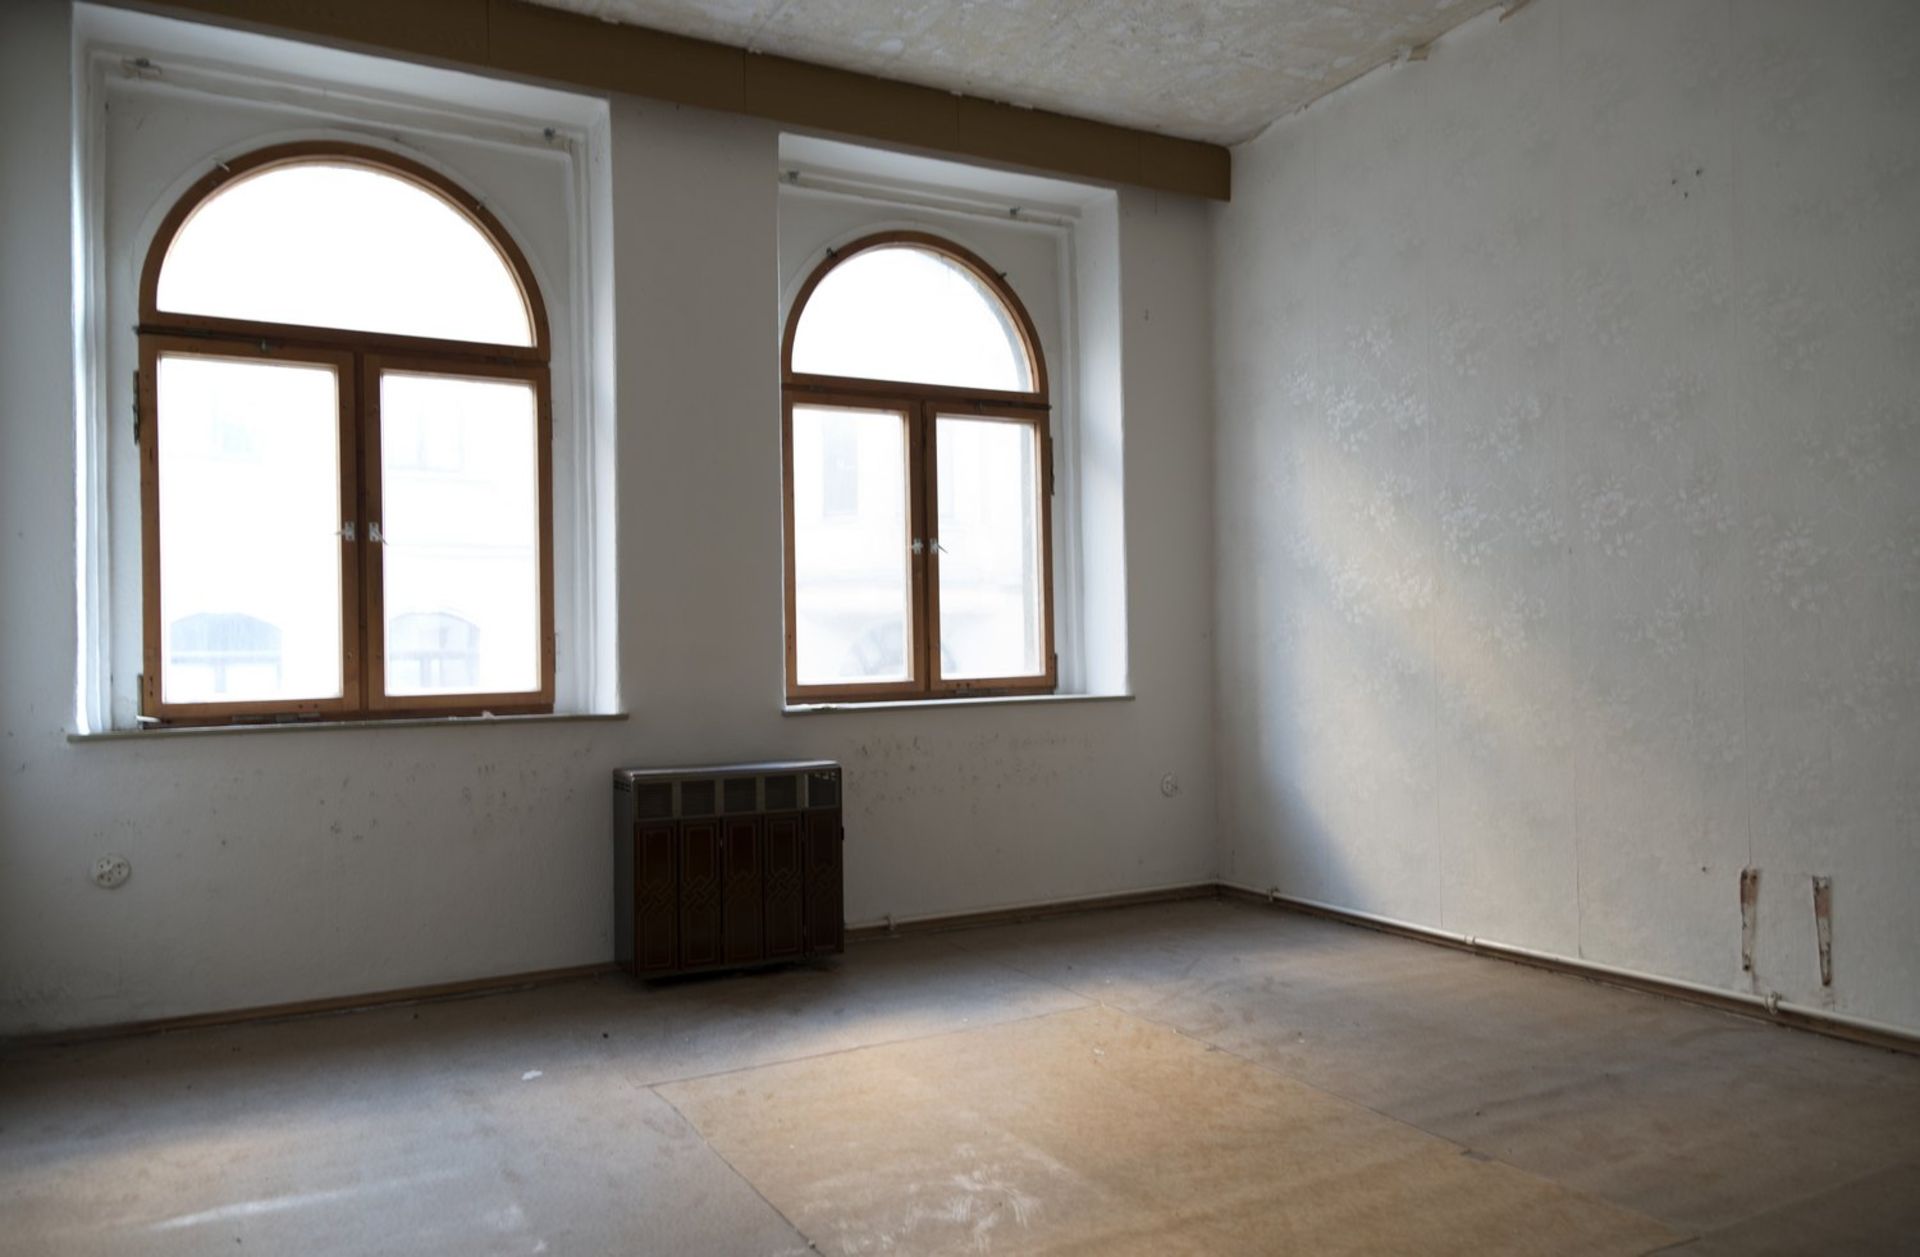 4 STOREY GERMANY APARTMENT BLOCK IN ADDITION TO A FULL BASEMENT + HUGE ATTIC! - Image 16 of 76